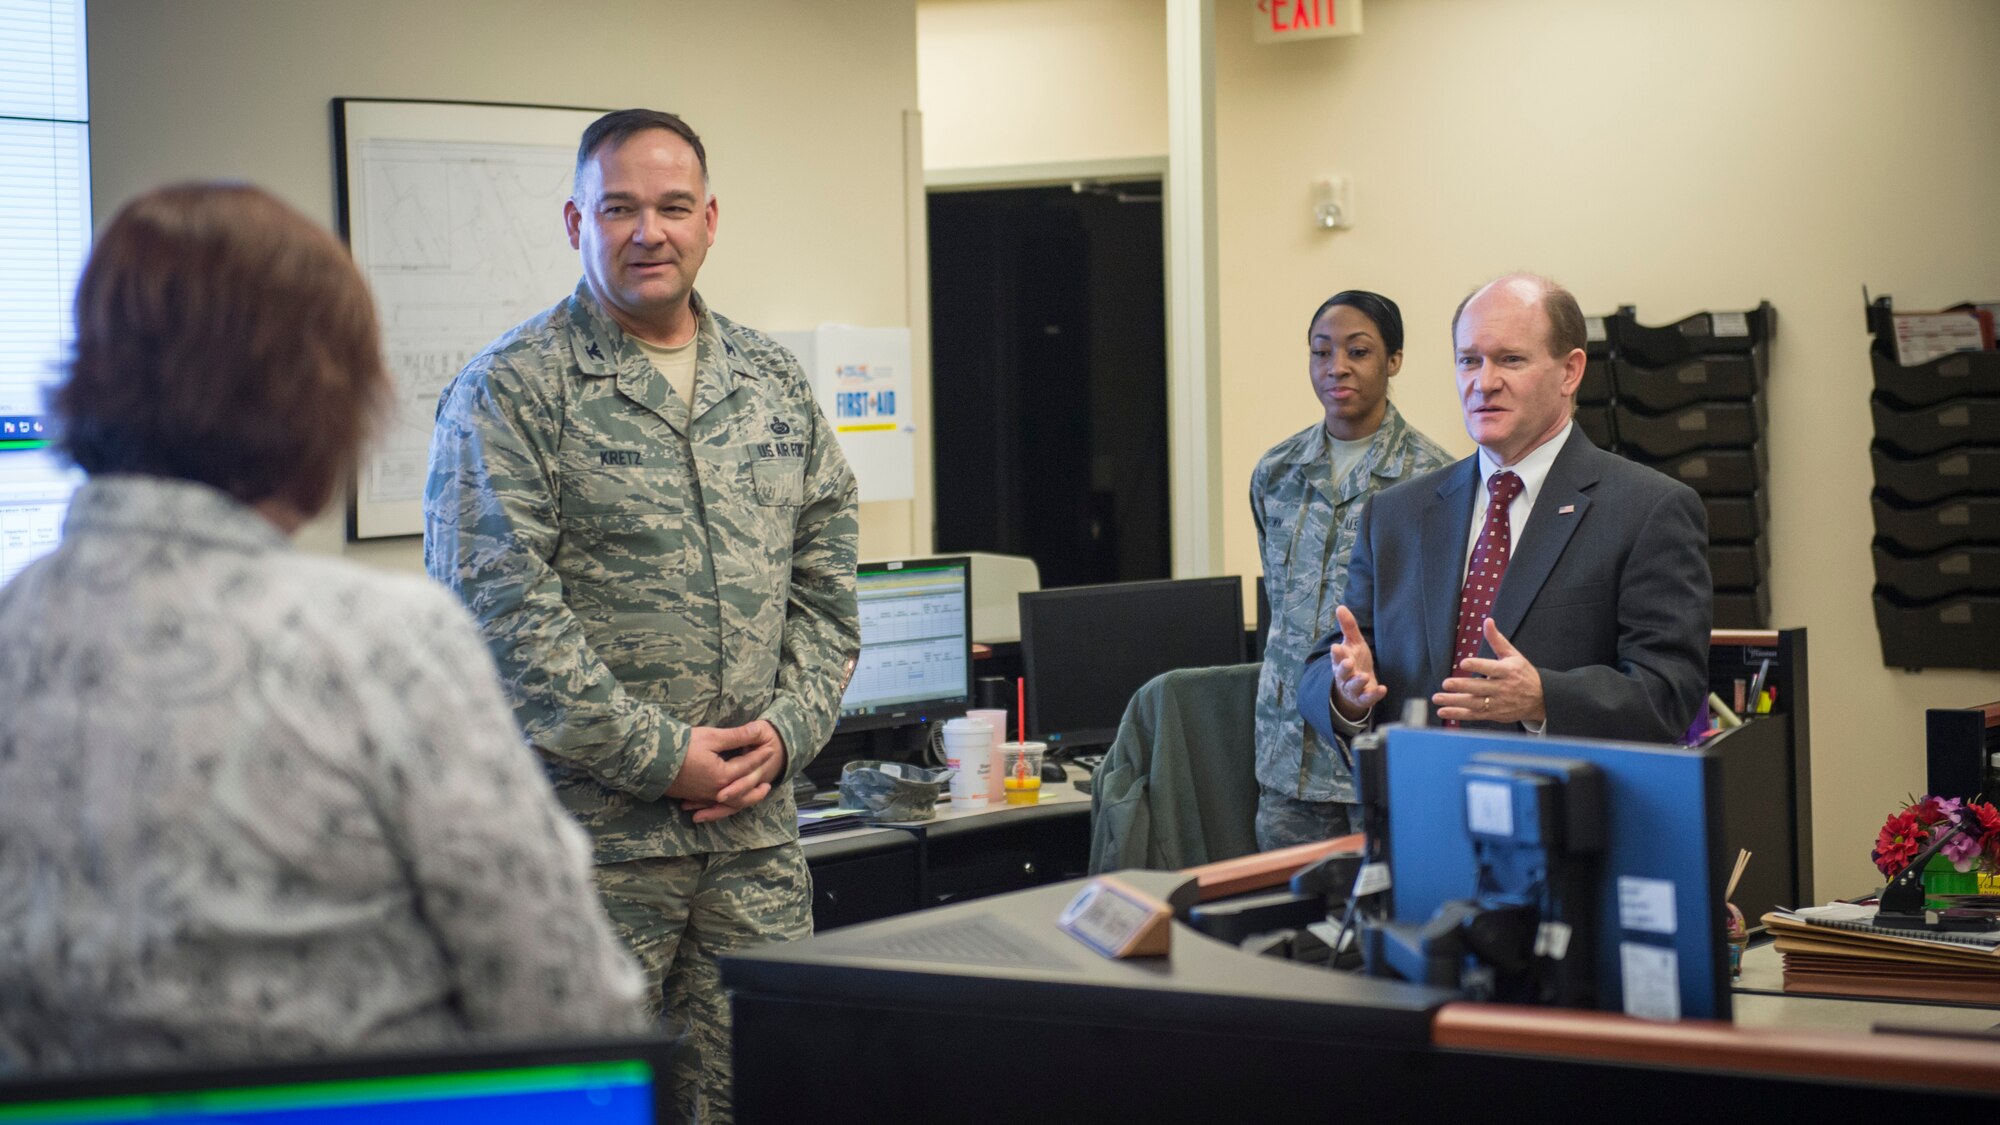 Sen. Chris Coons of Delaware learns about the Human Remains Command, Control and Communication mission Feb. 9, 2015, during a visit to Air Force Mortuary Affairs Operations, Dover Air Force Base, Del. The senator and his staff met with Airmen to learn more about operations at the Department of Defense’s sole port mortuary. (U.S. Air Force photo by Capt. Ray Geoffroy)